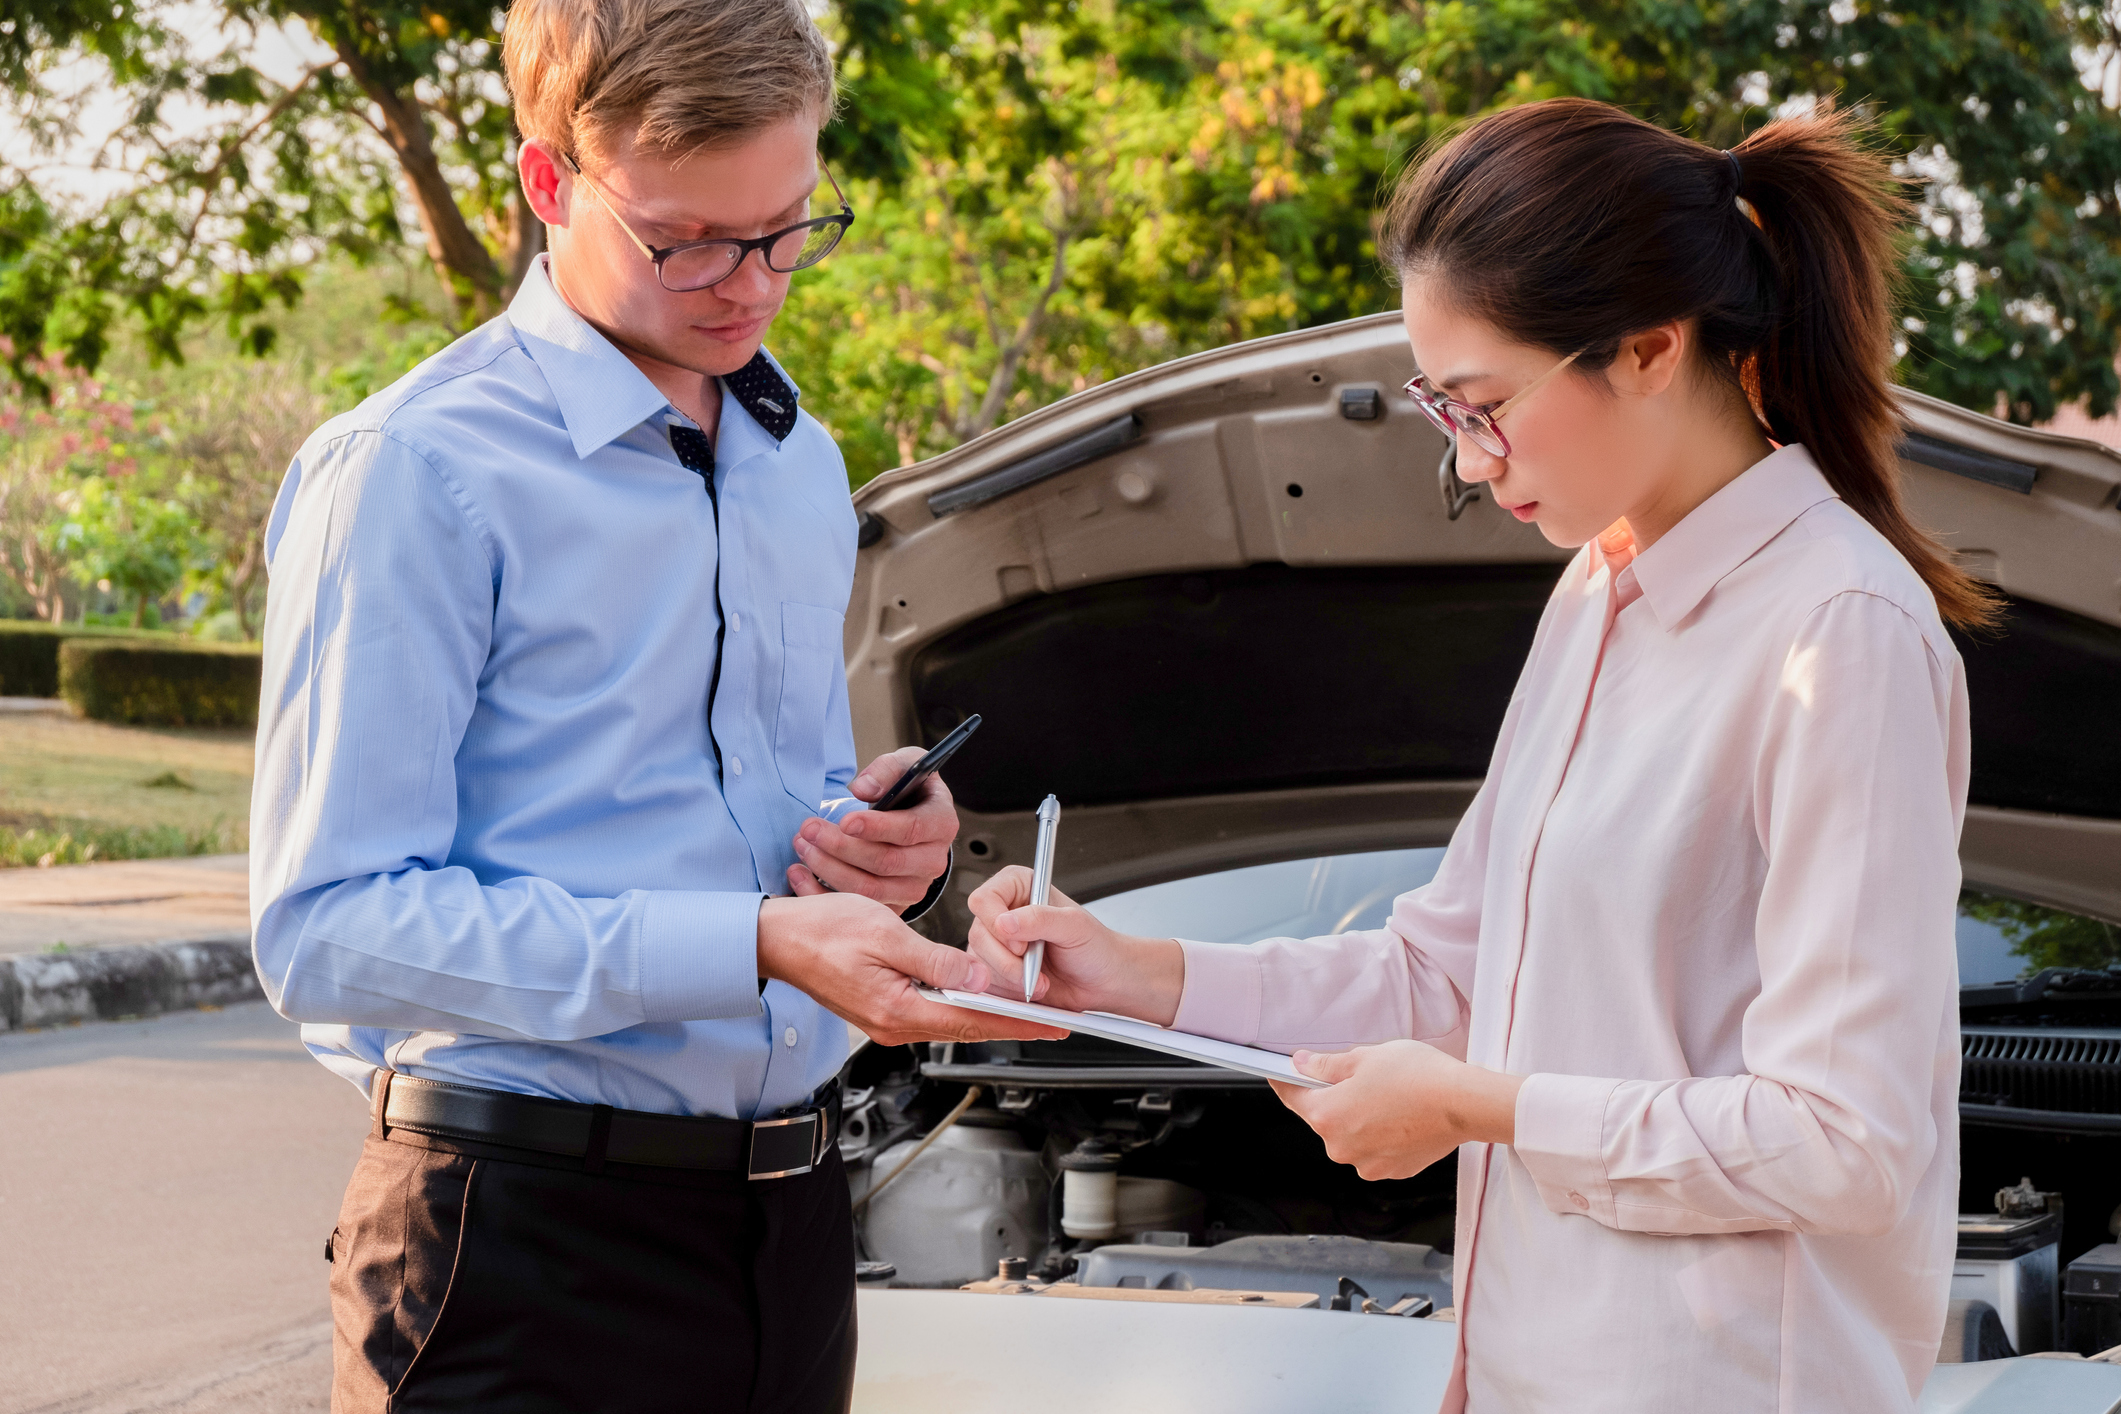 How can a defective car lawyer help me?